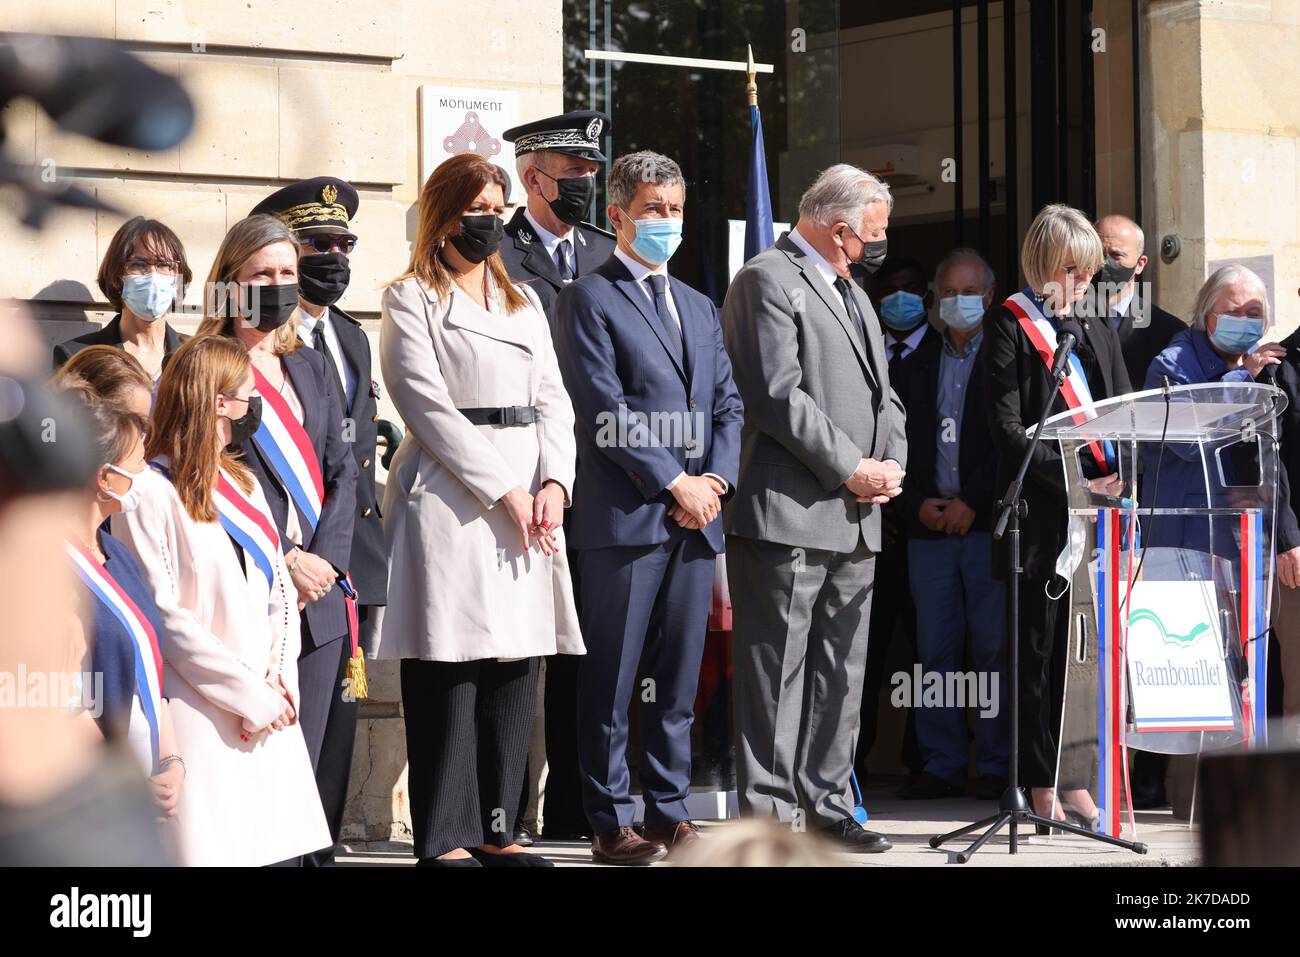 ©PHOTOPQR/LE PARISIEN/Arnaud Journois ; RAMBOUILLET ; 26/04/2021 ; HOMMAGE A STEPHANIE MONFERME , FONCTIONNAIRE DE POLICE ASSASSINNE A RAMBOUILLET , SUR LE PARVIS DE L'HOTEL DE VILLE EN PRESENCE DE GERALD DARMANIN , MARLENE SCHIAPPA ET GERARD LARCHER - Rambouillet, France, april 26th 2021 An official tribute is to be paid by the town hall of Rambouillet to Stephanie M. on 26 April. The rally will take place in front of the police station, where she was murdered. Stock Photo